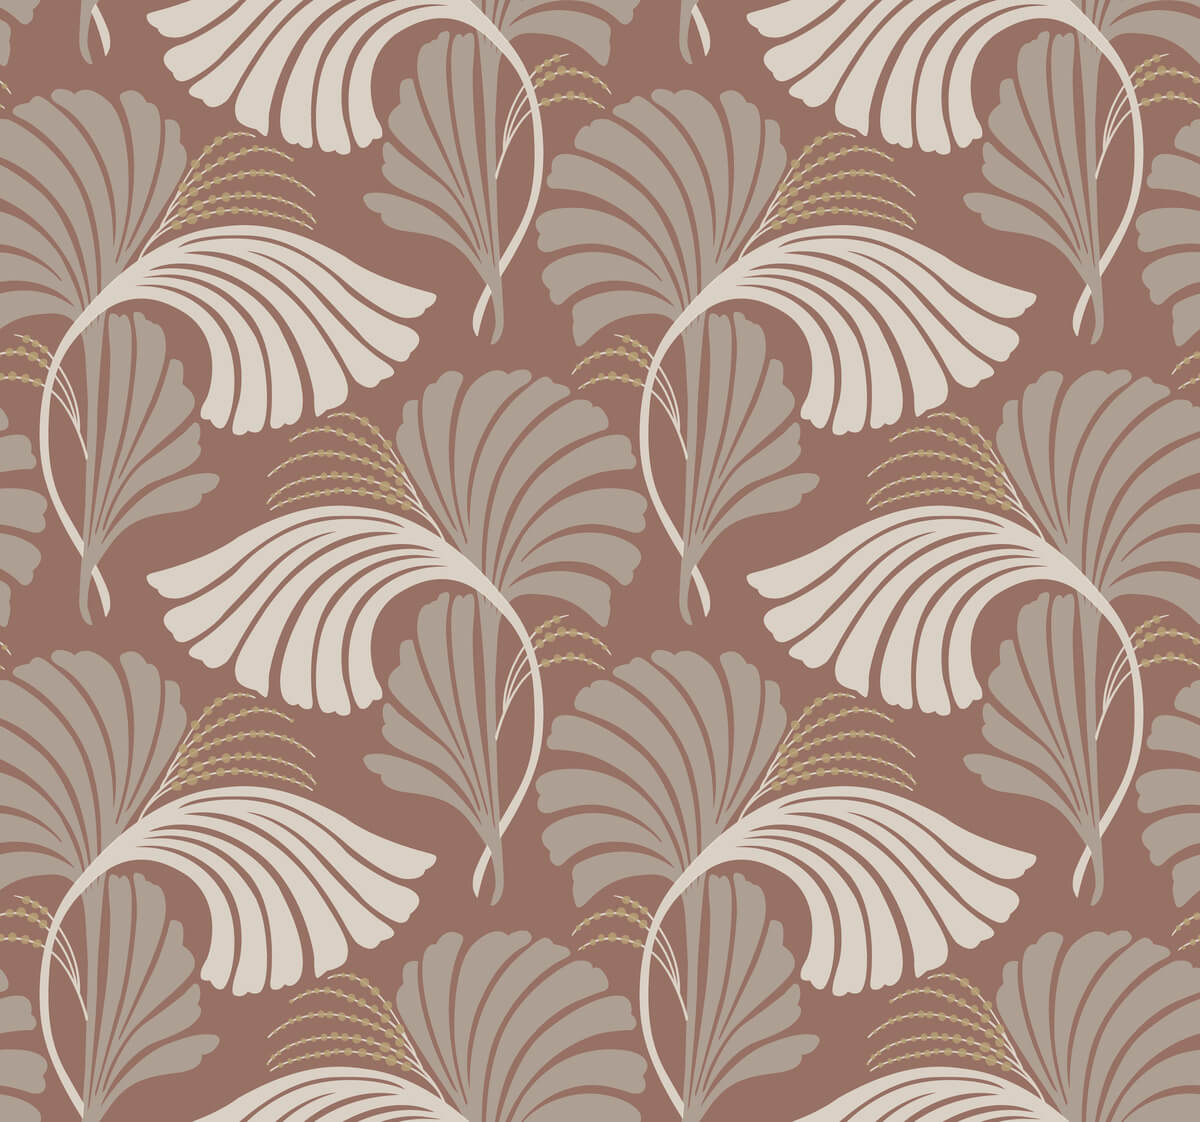 Candice Olson After 8 Dancing Leaves Wallpaper - Tan